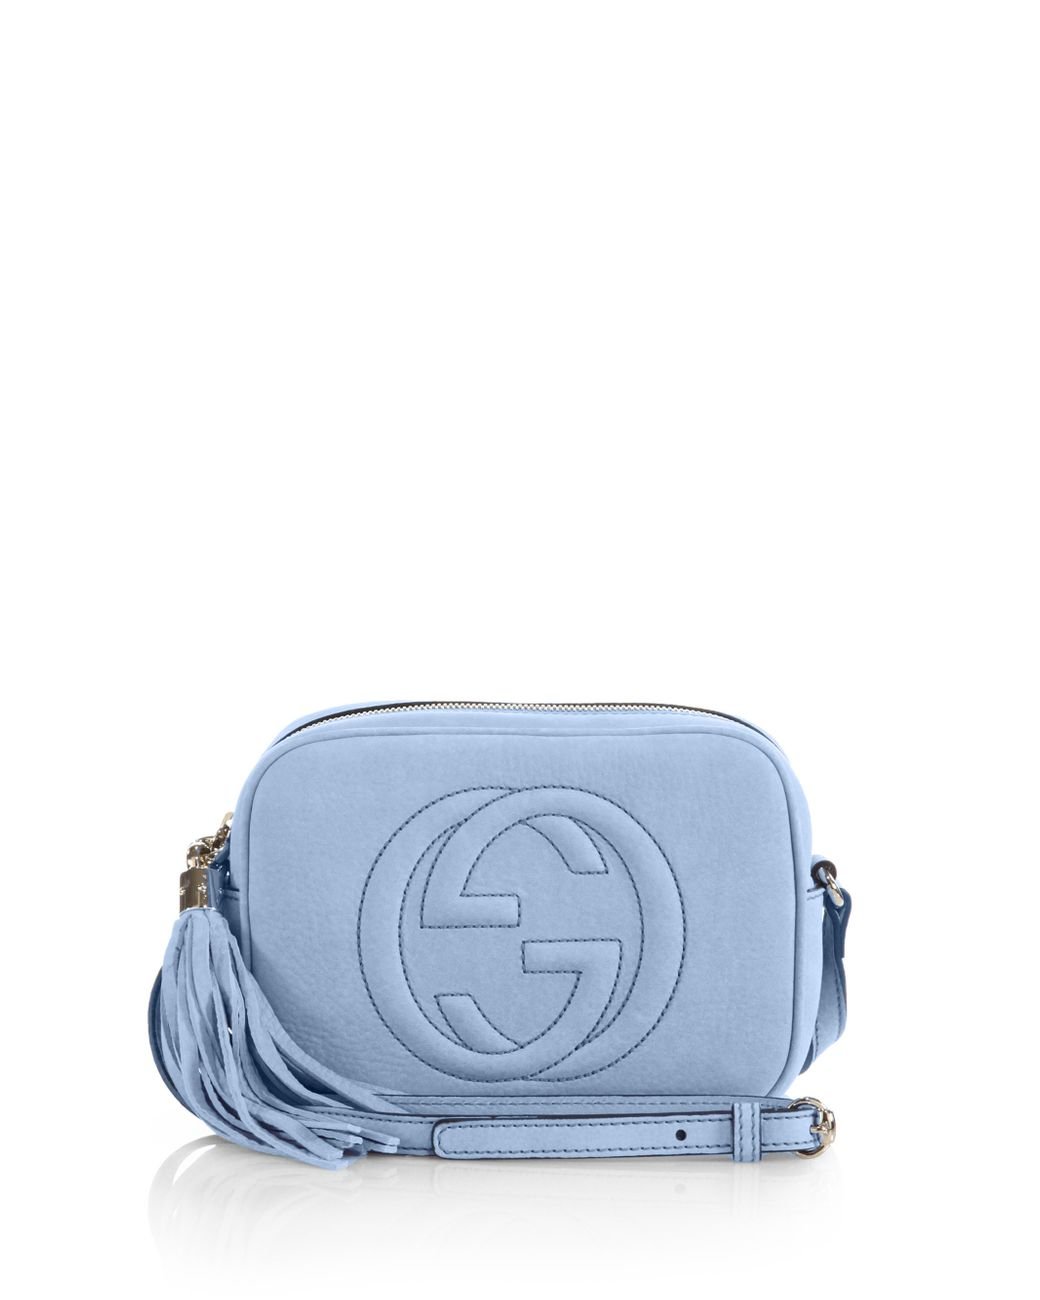 Gucci Soho Leather Disco Bag in |